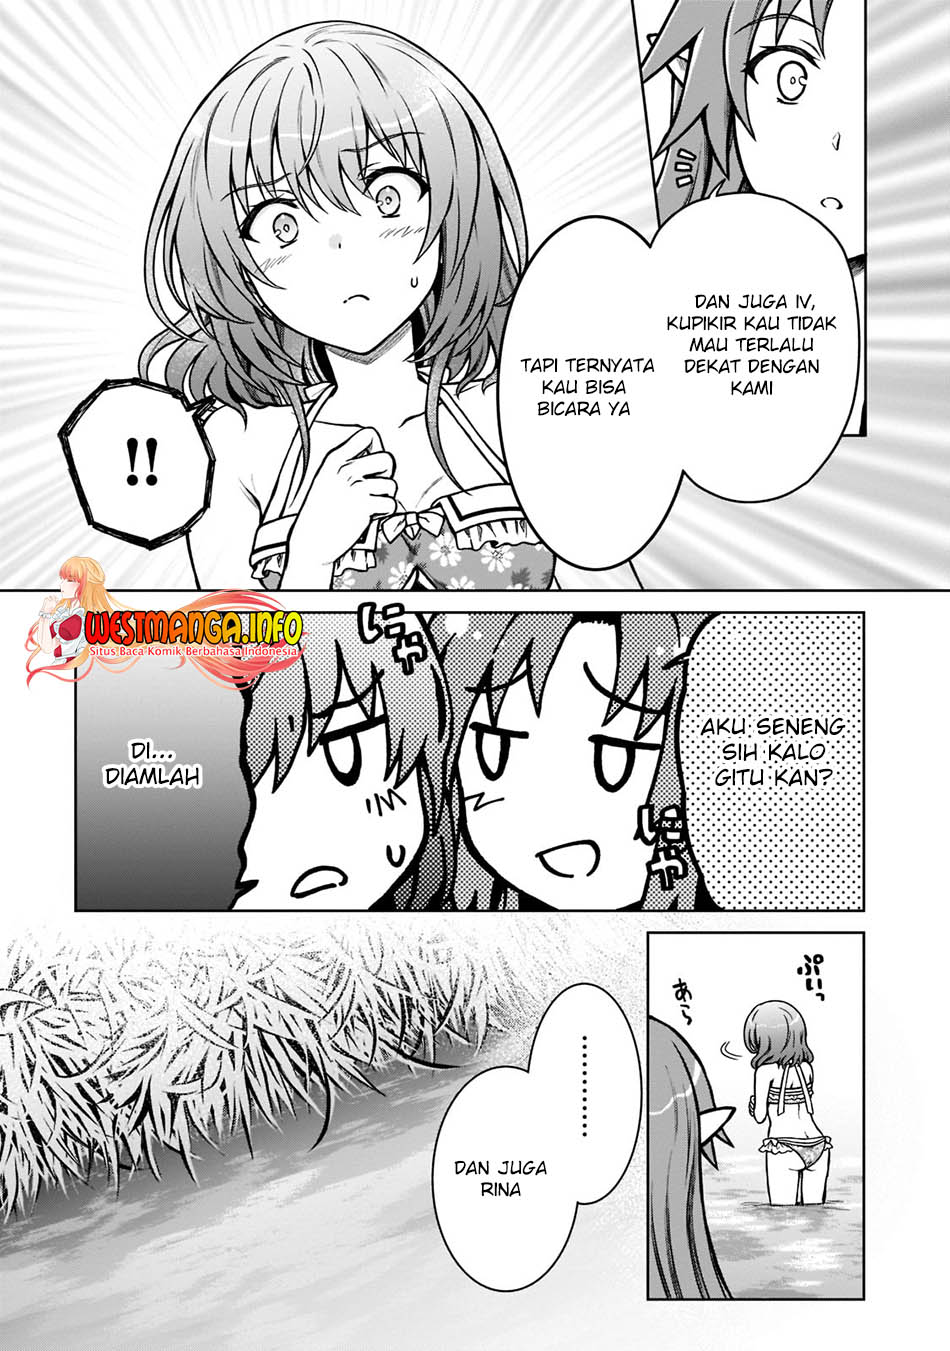 Dilarang COPAS - situs resmi www.mangacanblog.com - Komik d rank adventurer invited by a brave party and the stalking princess 008 - chapter 8 9 Indonesia d rank adventurer invited by a brave party and the stalking princess 008 - chapter 8 Terbaru 7|Baca Manga Komik Indonesia|Mangacan